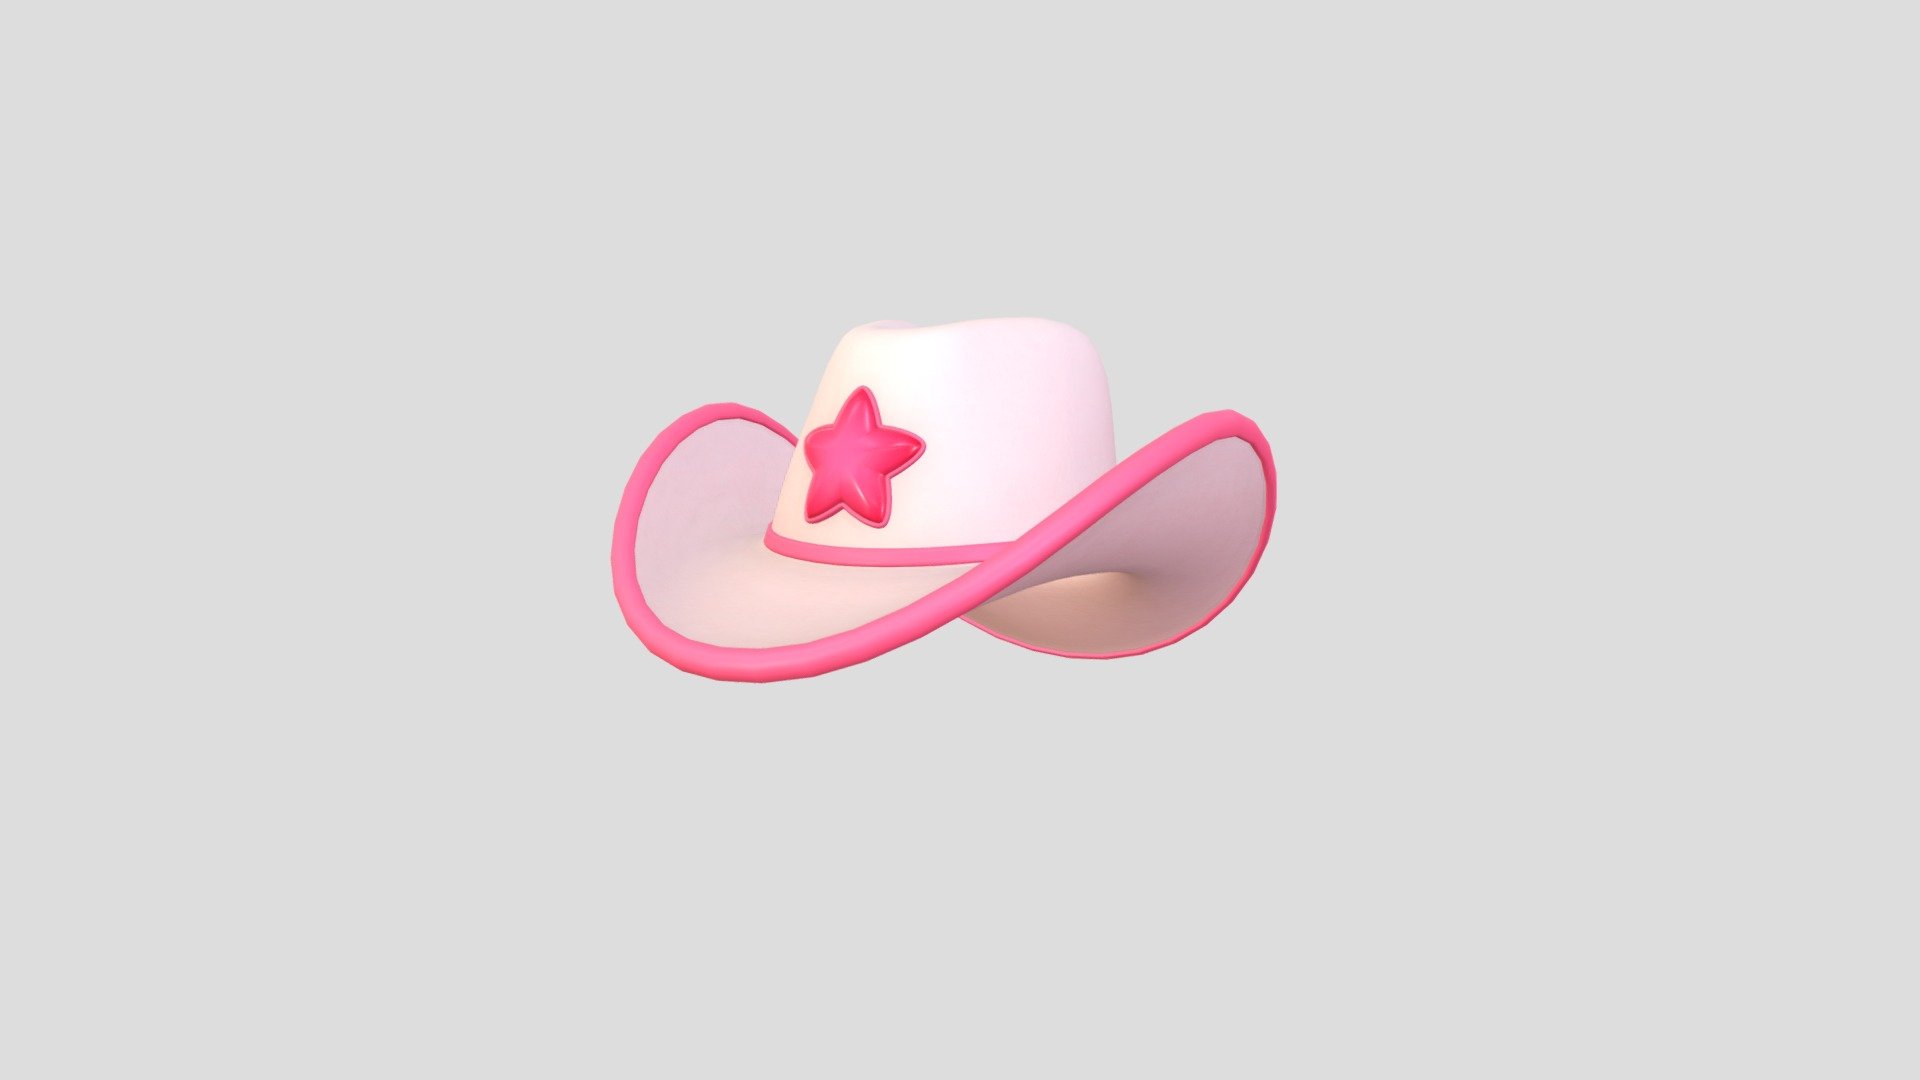 Cowgirl Hat 3d model.      
    


File Format      
 
- 3ds max 2023  
 
- Blender 4.0  
 
- FBX  
 
- GLB  
 
- OBJ  
    


Clean topology    

No Rig                          

Non-overlapping unwrapped UVs        
 


PNG texture               

2048x2048                


- Base Color                        

- Normal                            

- Roughness                         



1,986 polygons                          

2,147 vertexs                          
 - Prop249 Cowgirl Hat - Buy Royalty Free 3D model by BaluCG 3d model